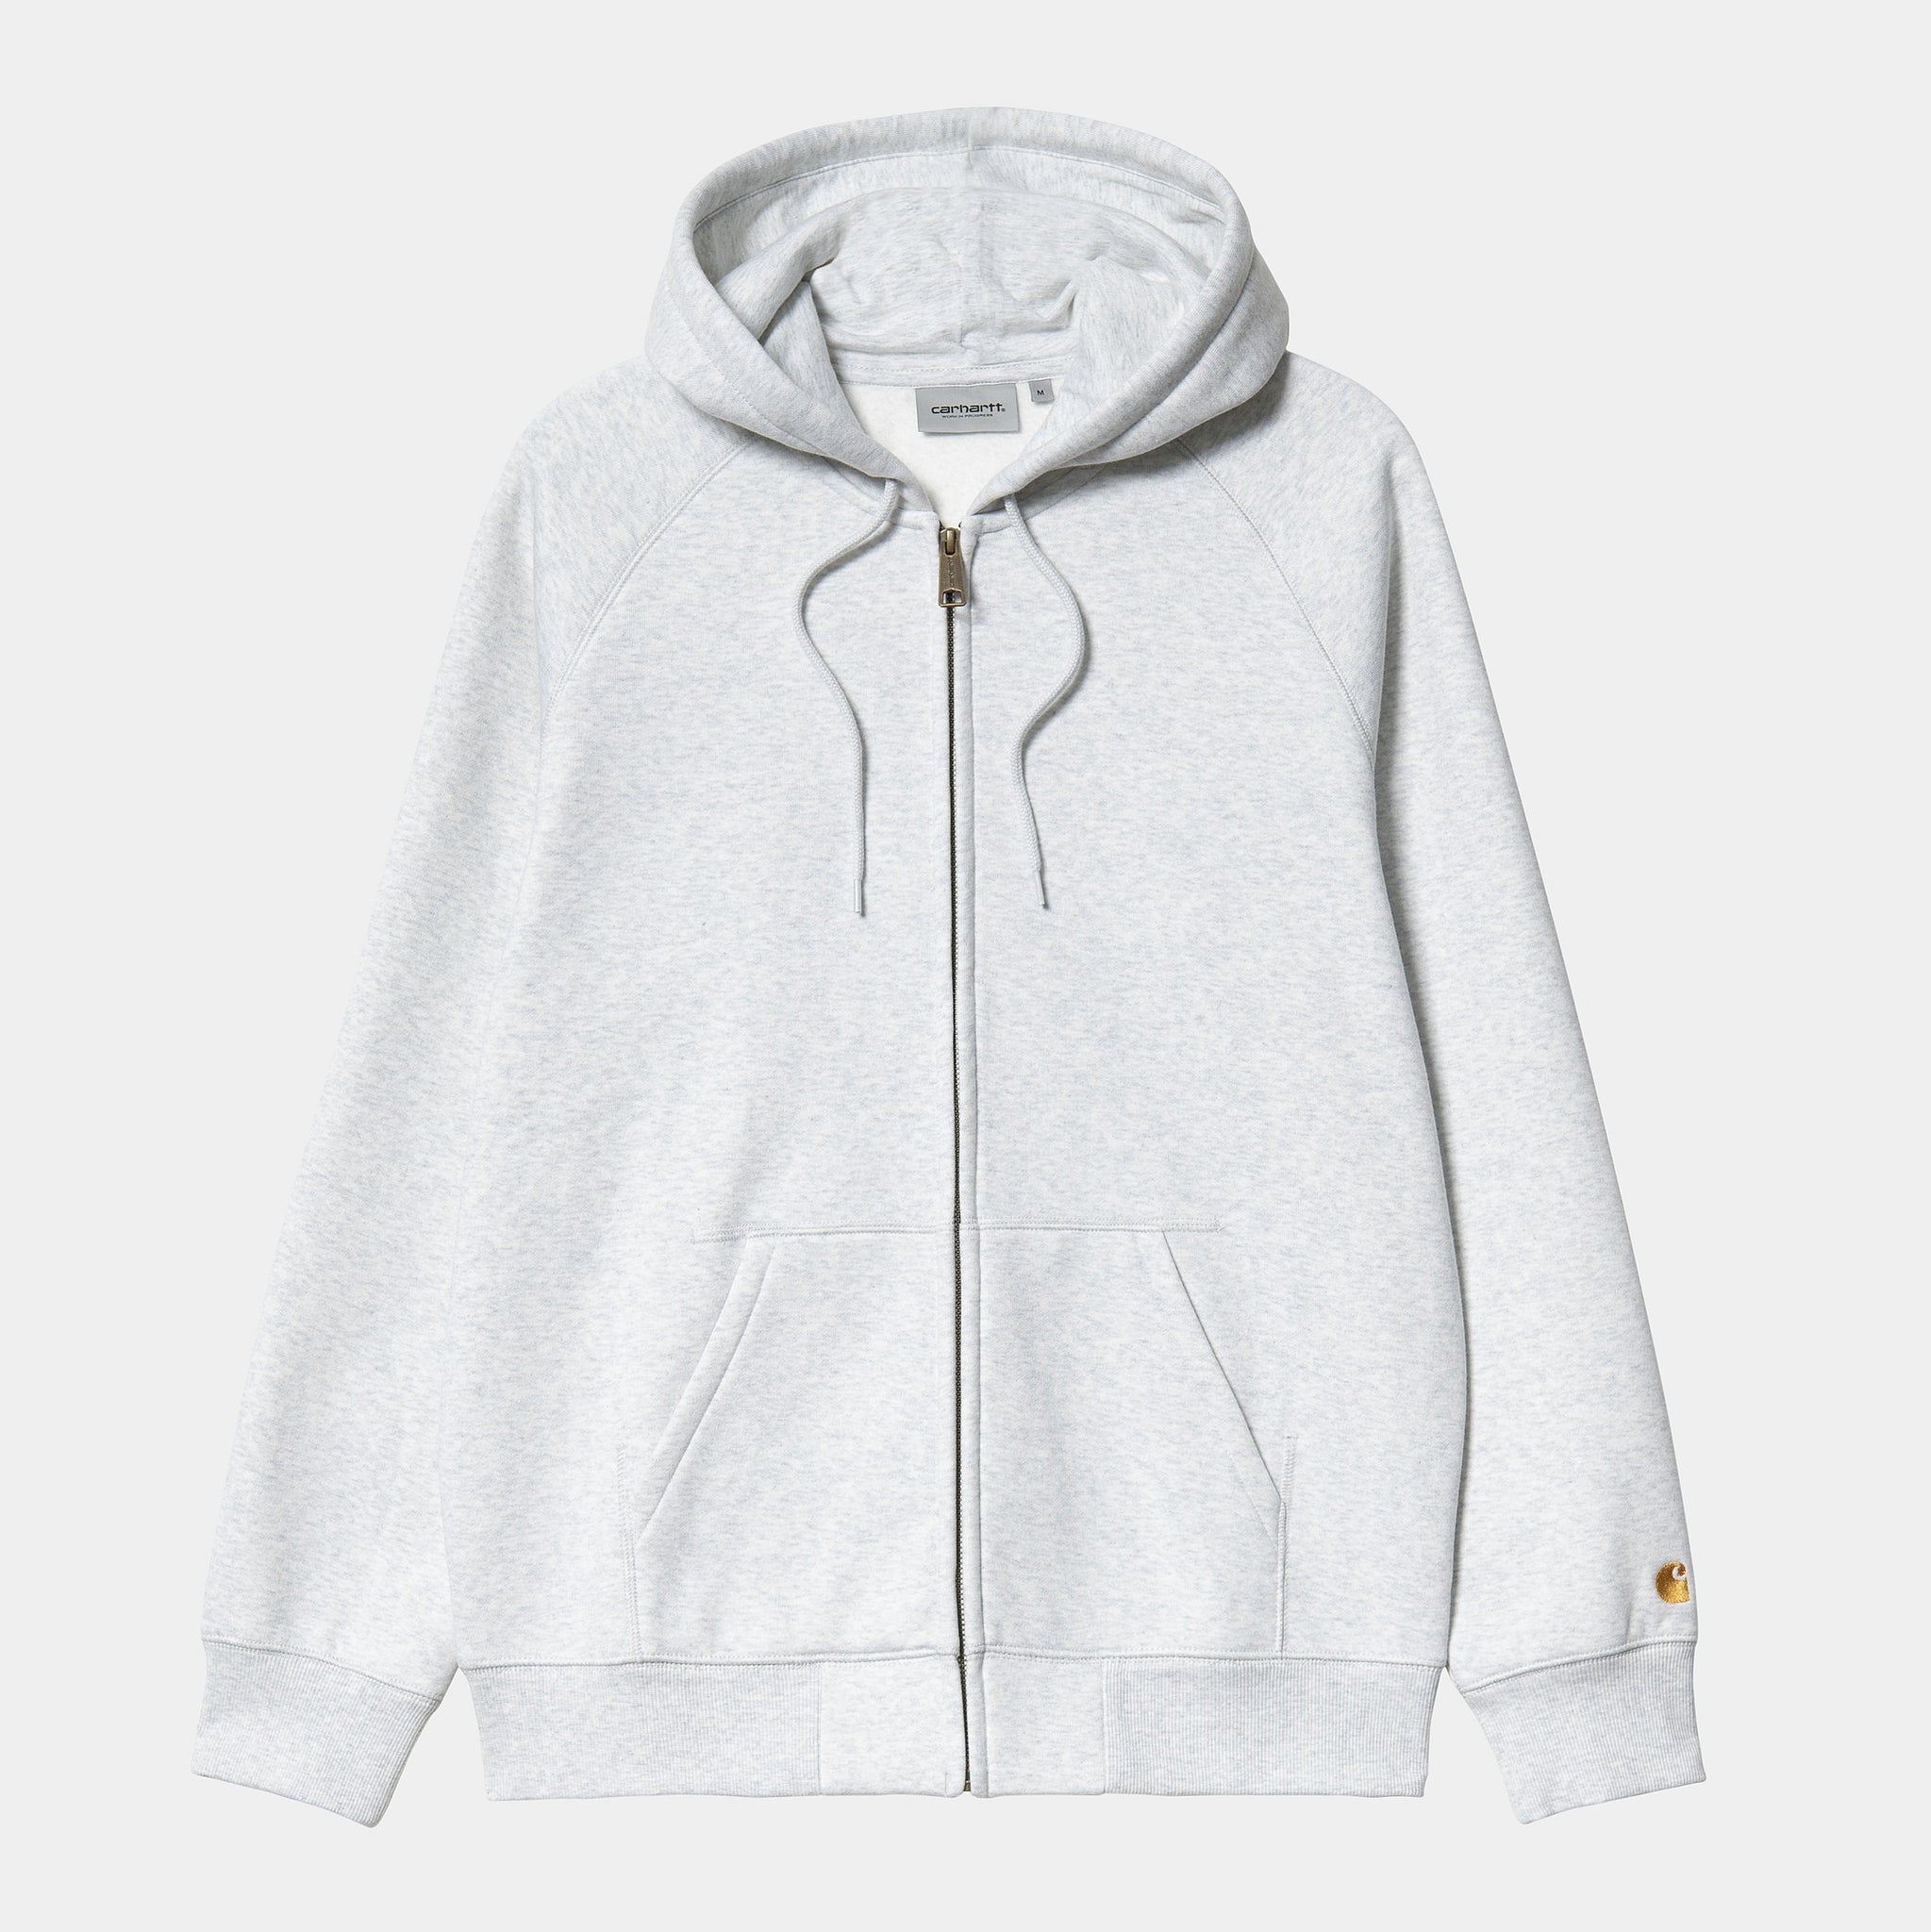 Carhartt Hooded Chase Jacket - Ash Heather/Gold